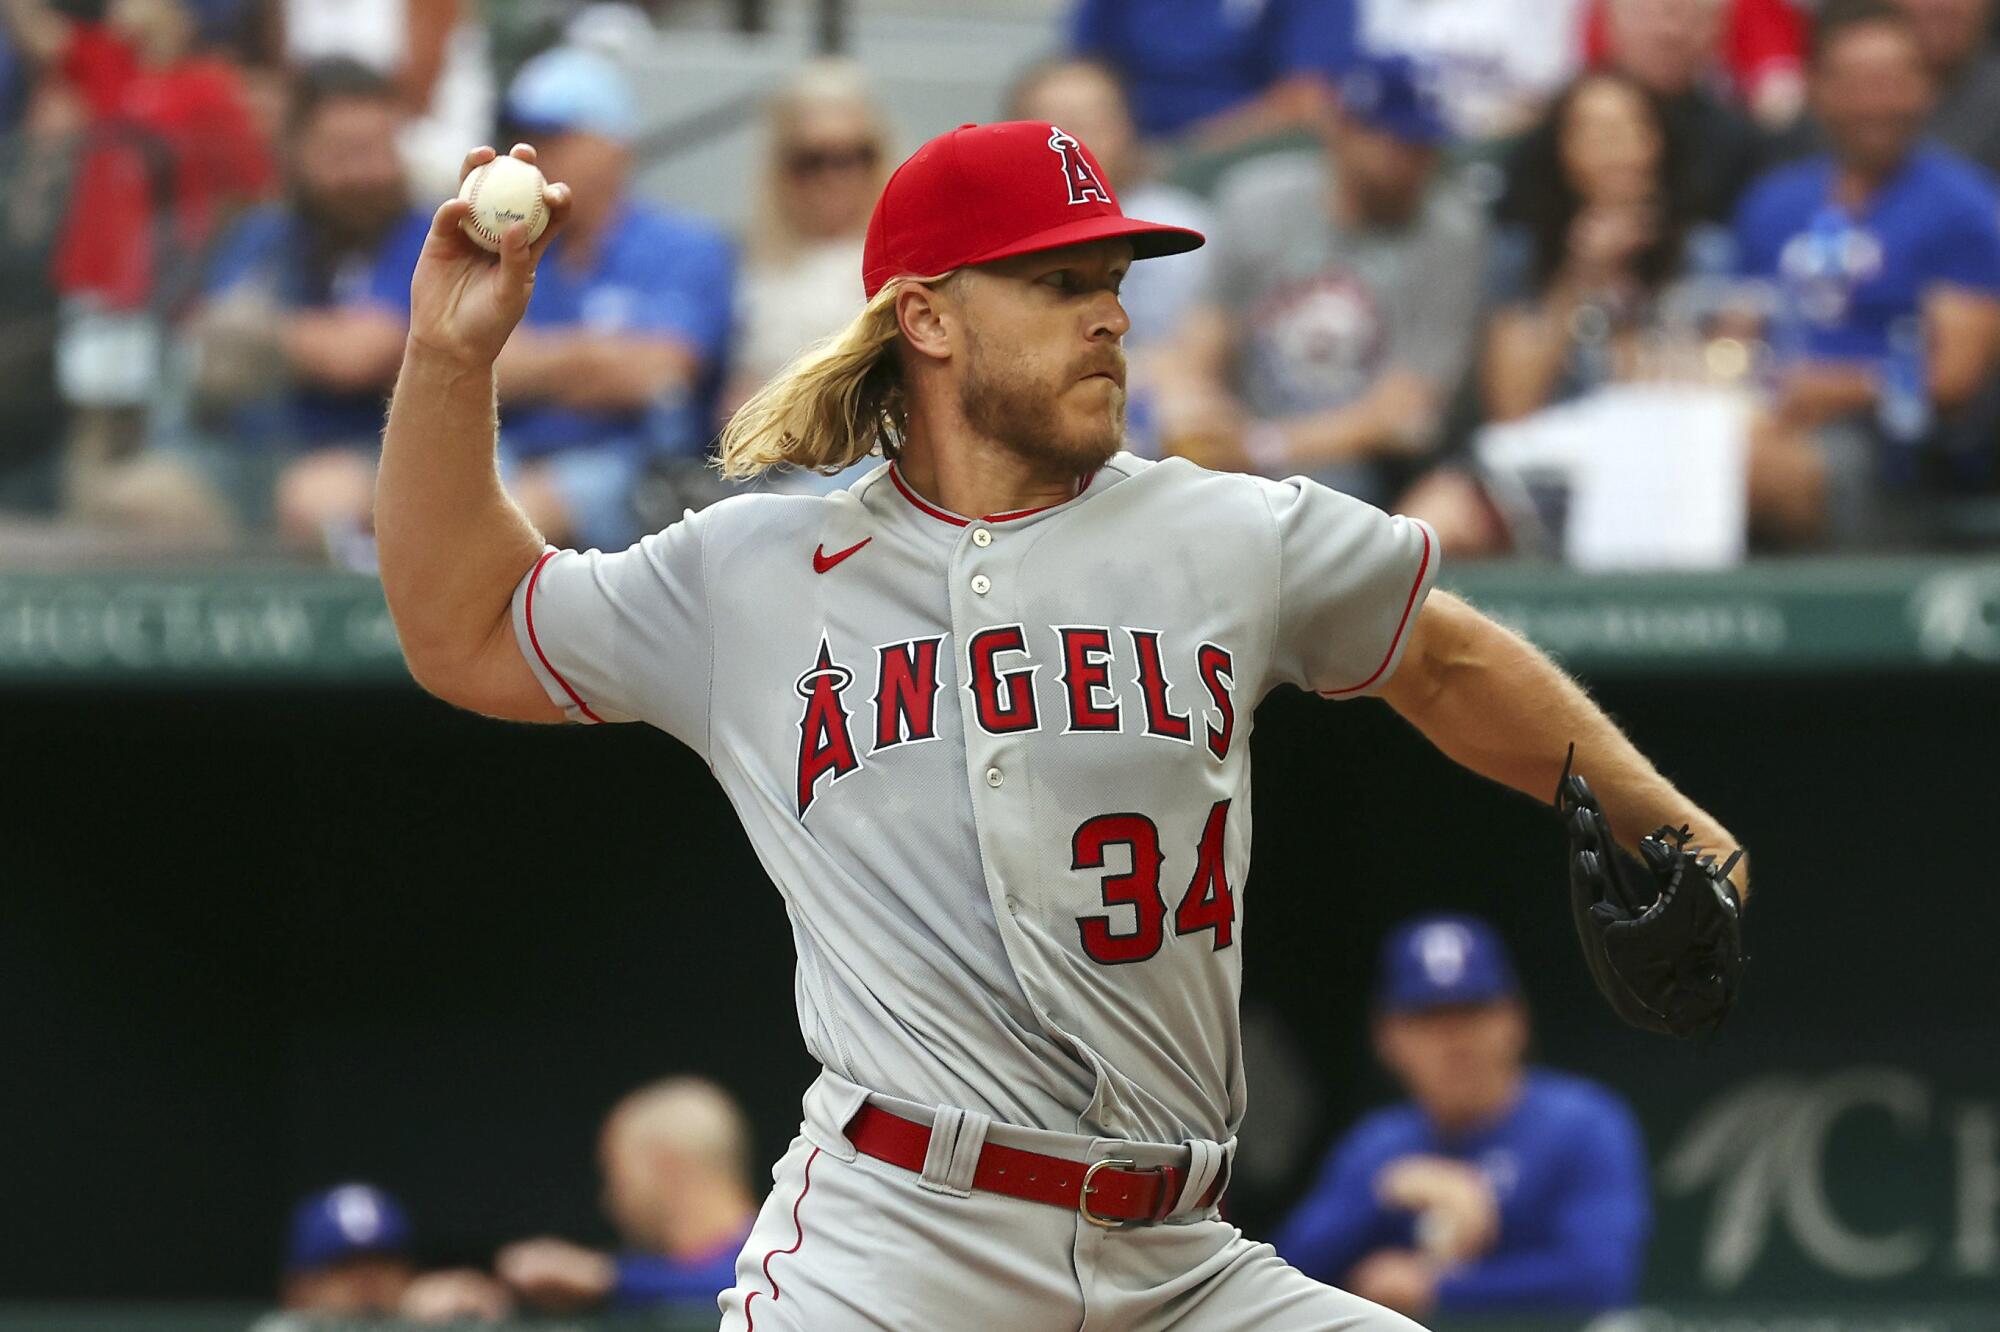 Noah Syndergaard pitches for the Angels against the Texas Rangers on April 16, 2022.